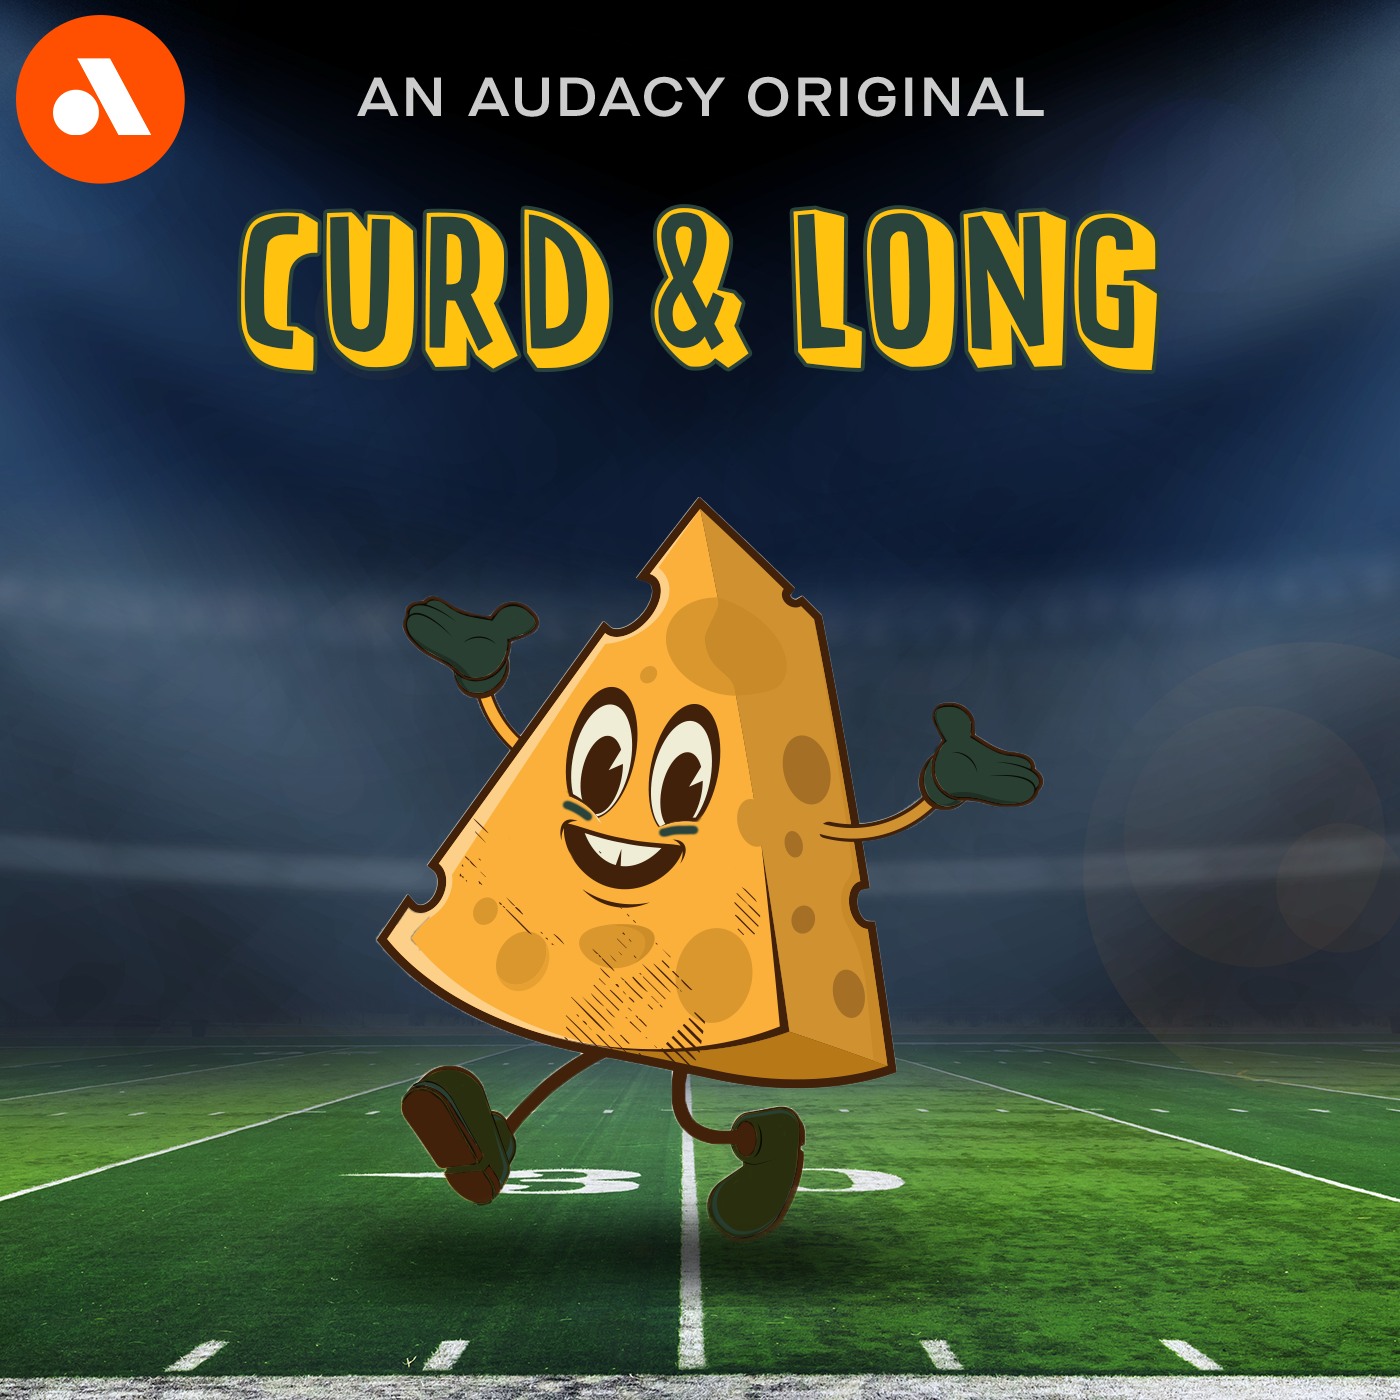 BONUS: Wanting Best for Aaron Rodgers and The Packers | 'Curd & Long'